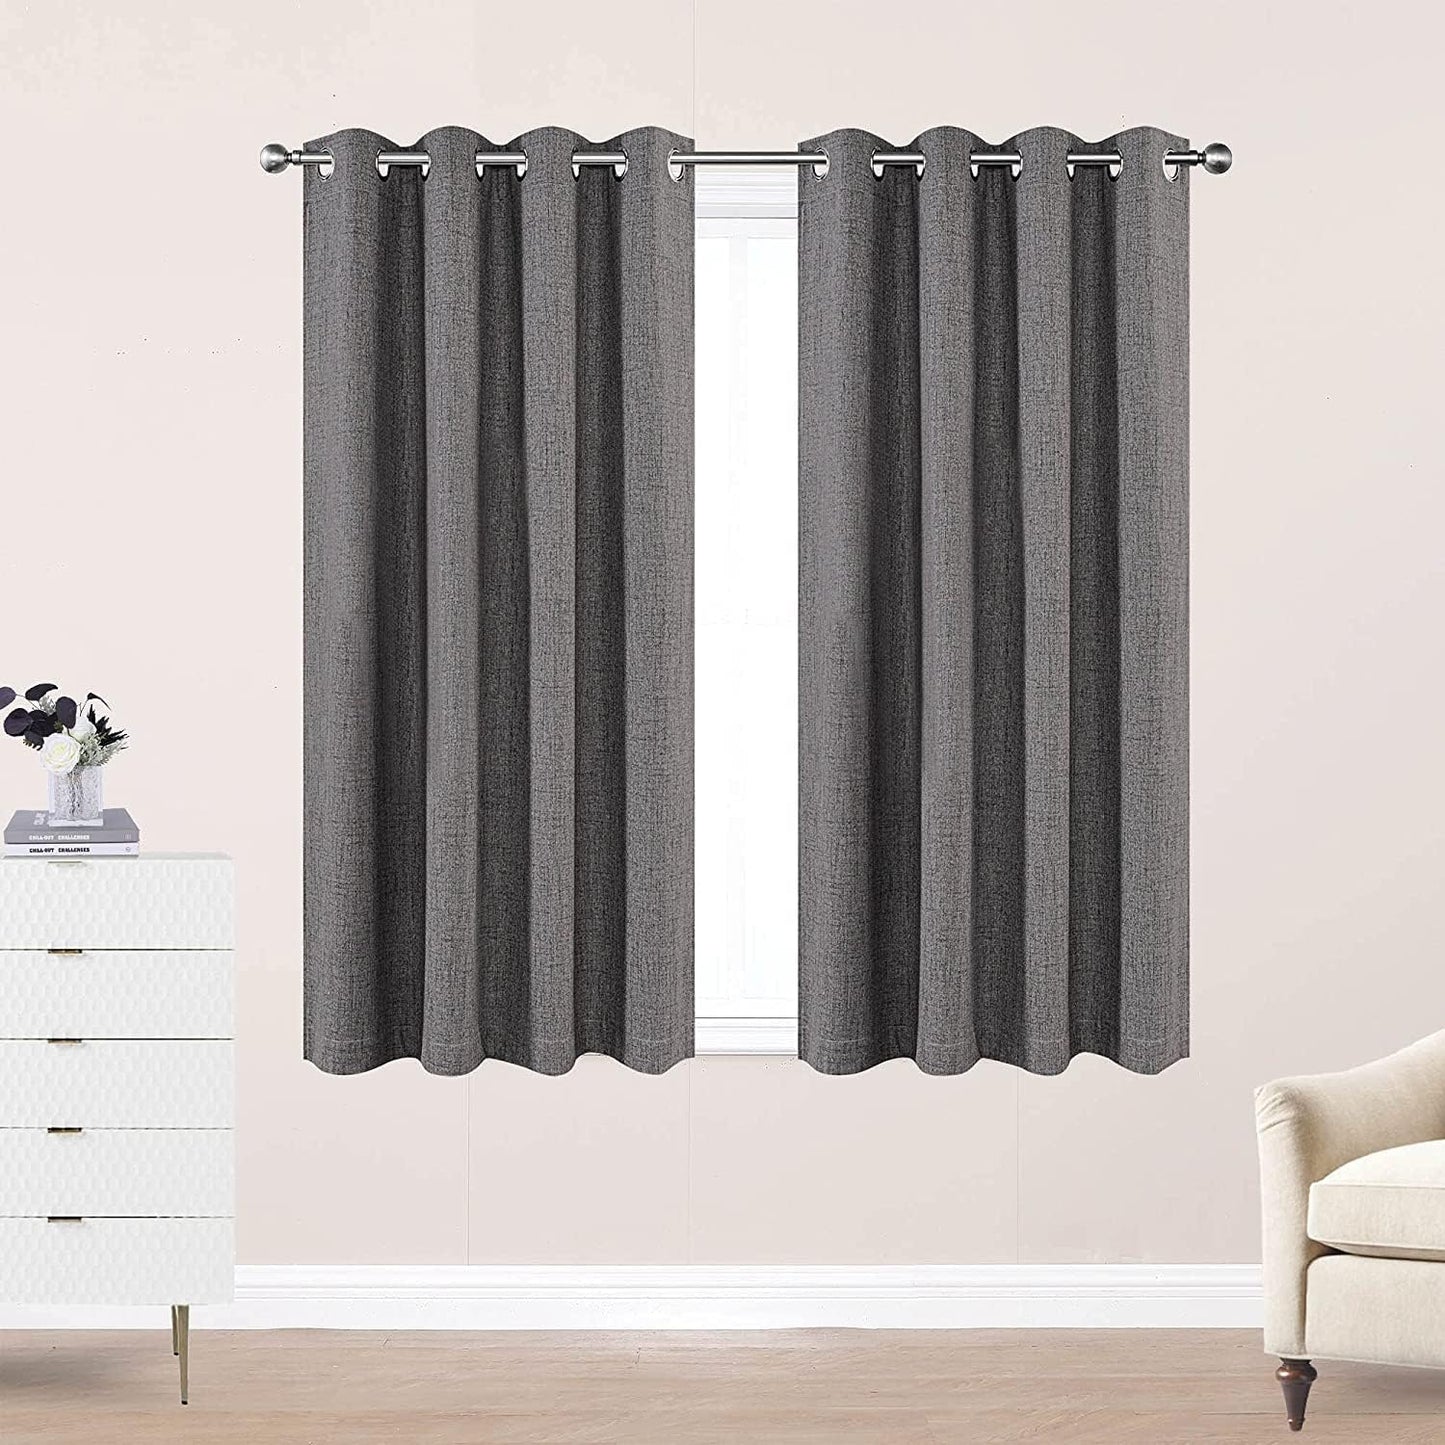 CUCRAF 100% Blackout Window Curtains for Bedroom Noise Reducing,Thermal Insulated Room Darkening Grommet Drapes for Living Room,2 Panels Sets(52 X 95 Inches, Light Khaki)  CUCRAF Grey 52 X 72 Inches 